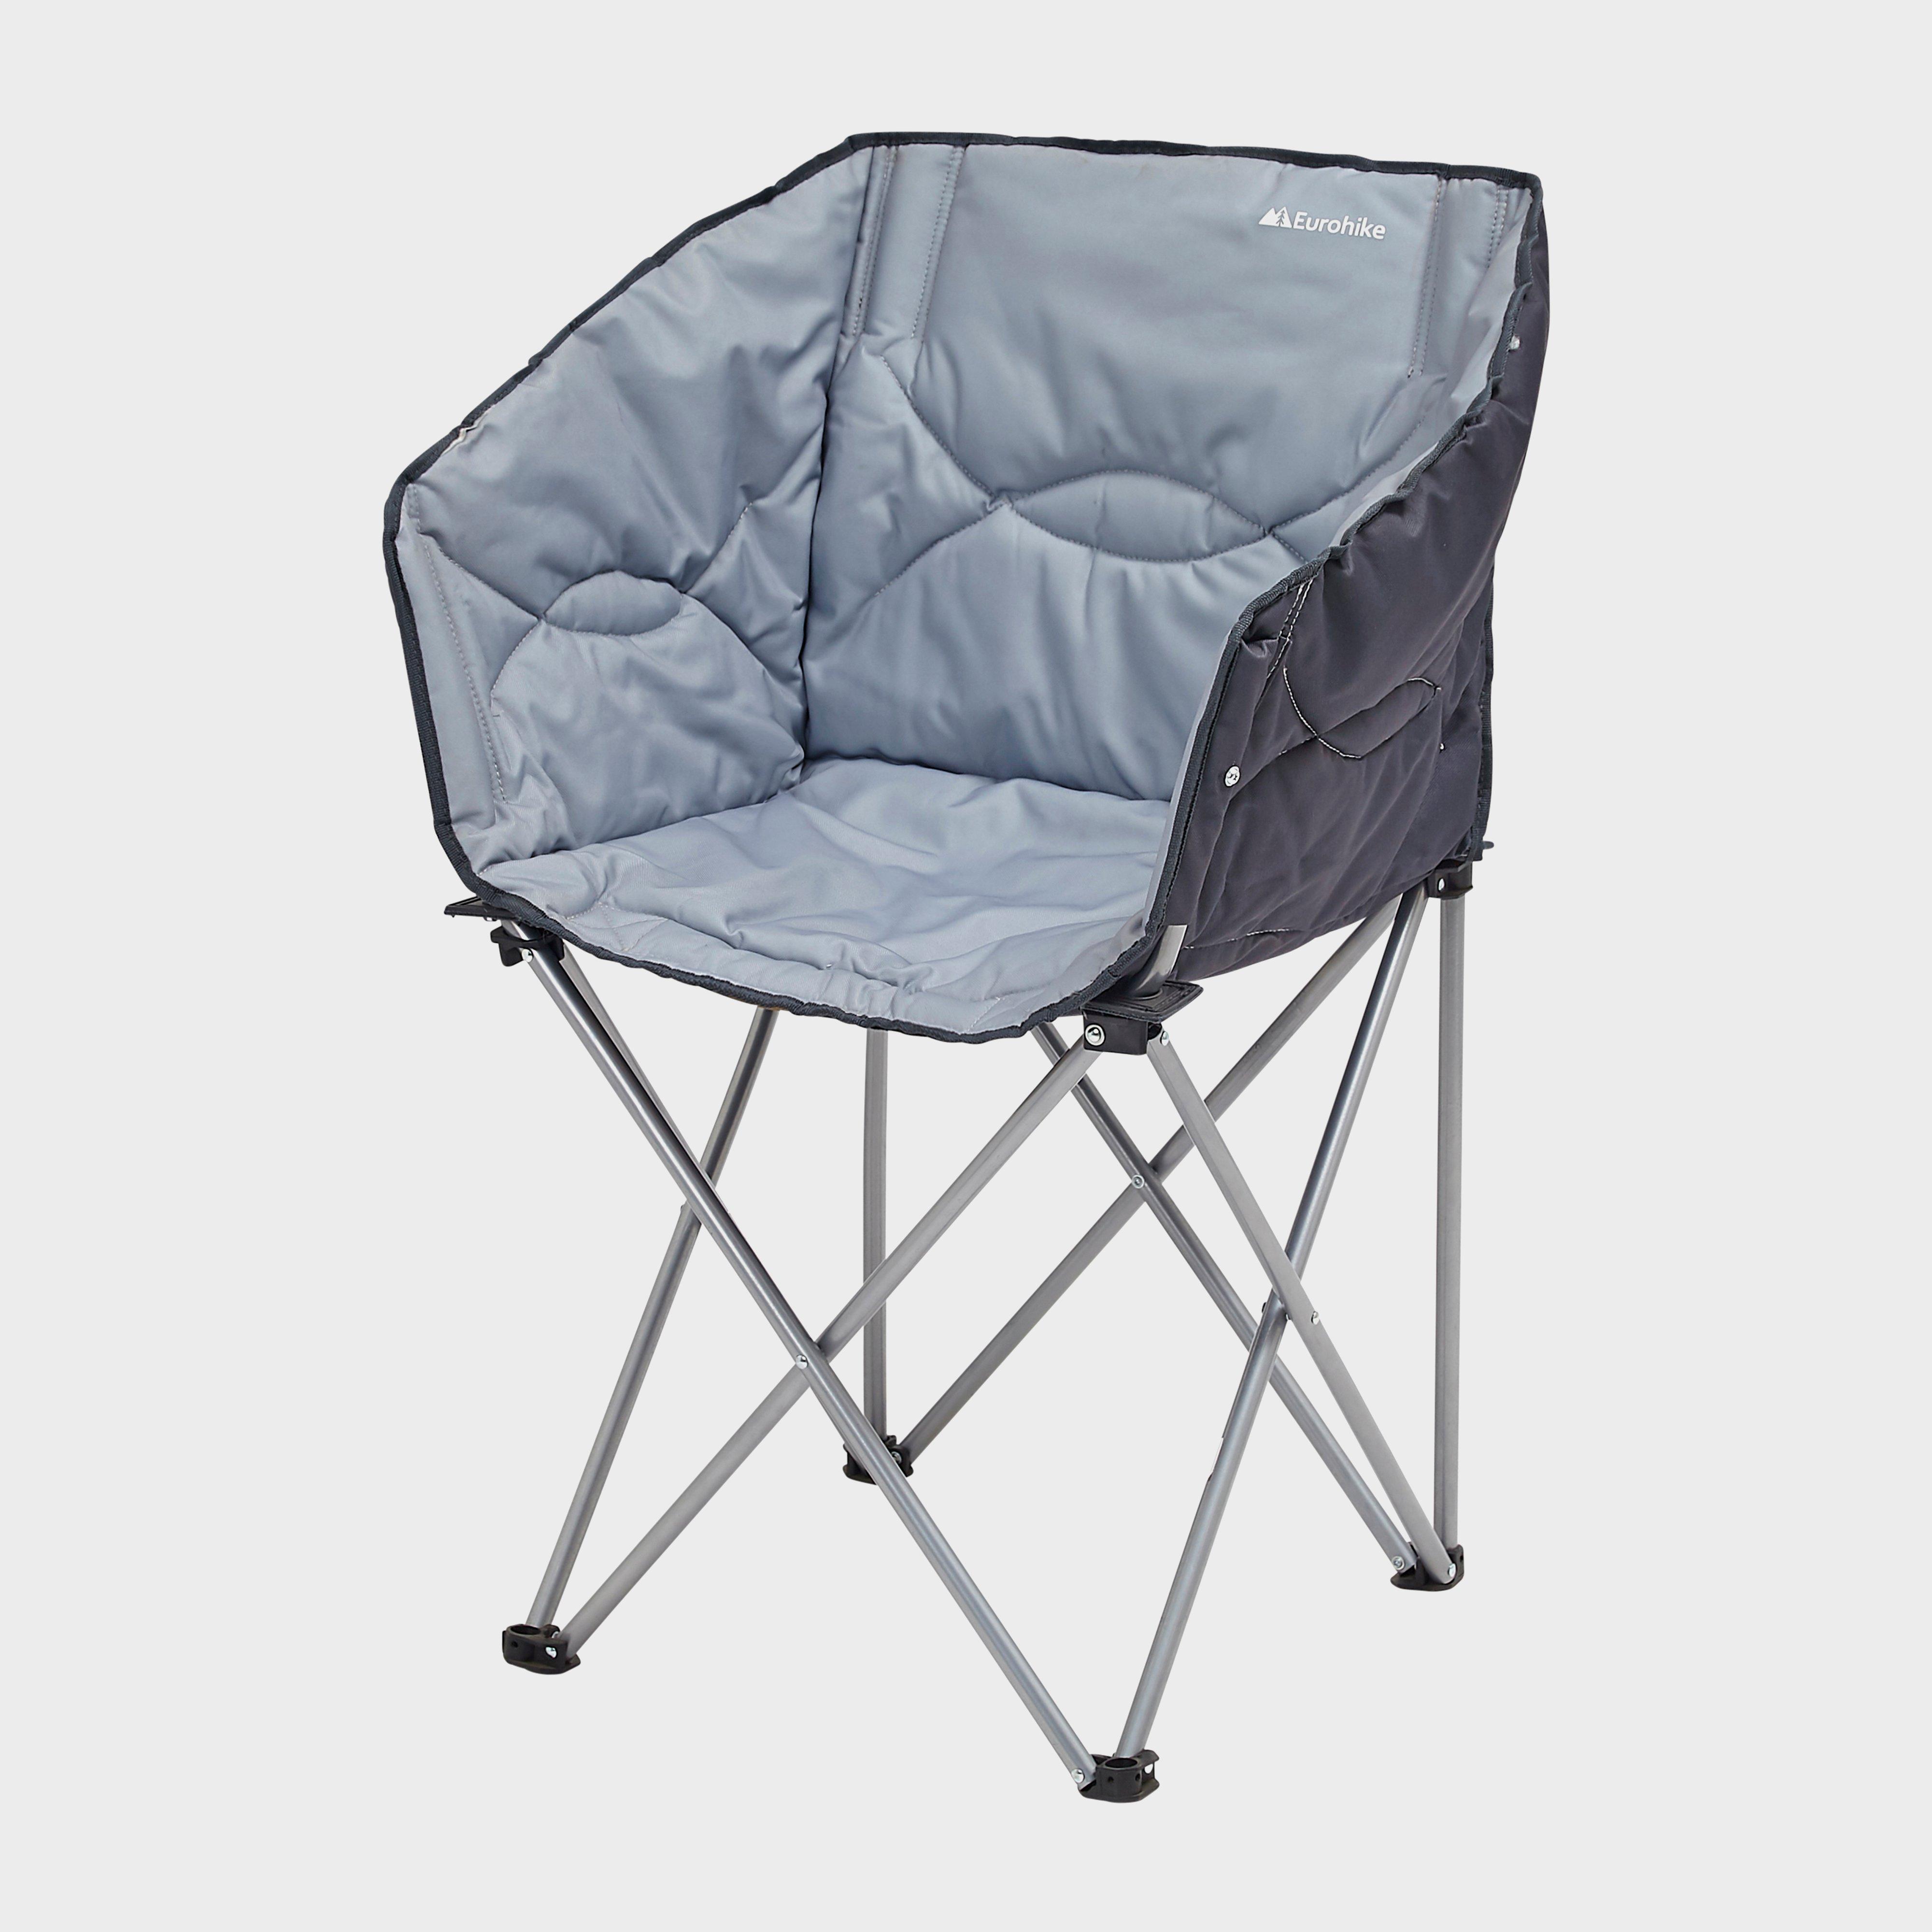 Eurohike Quilted Tub Chair - Blue/dgy  Blue/dgy